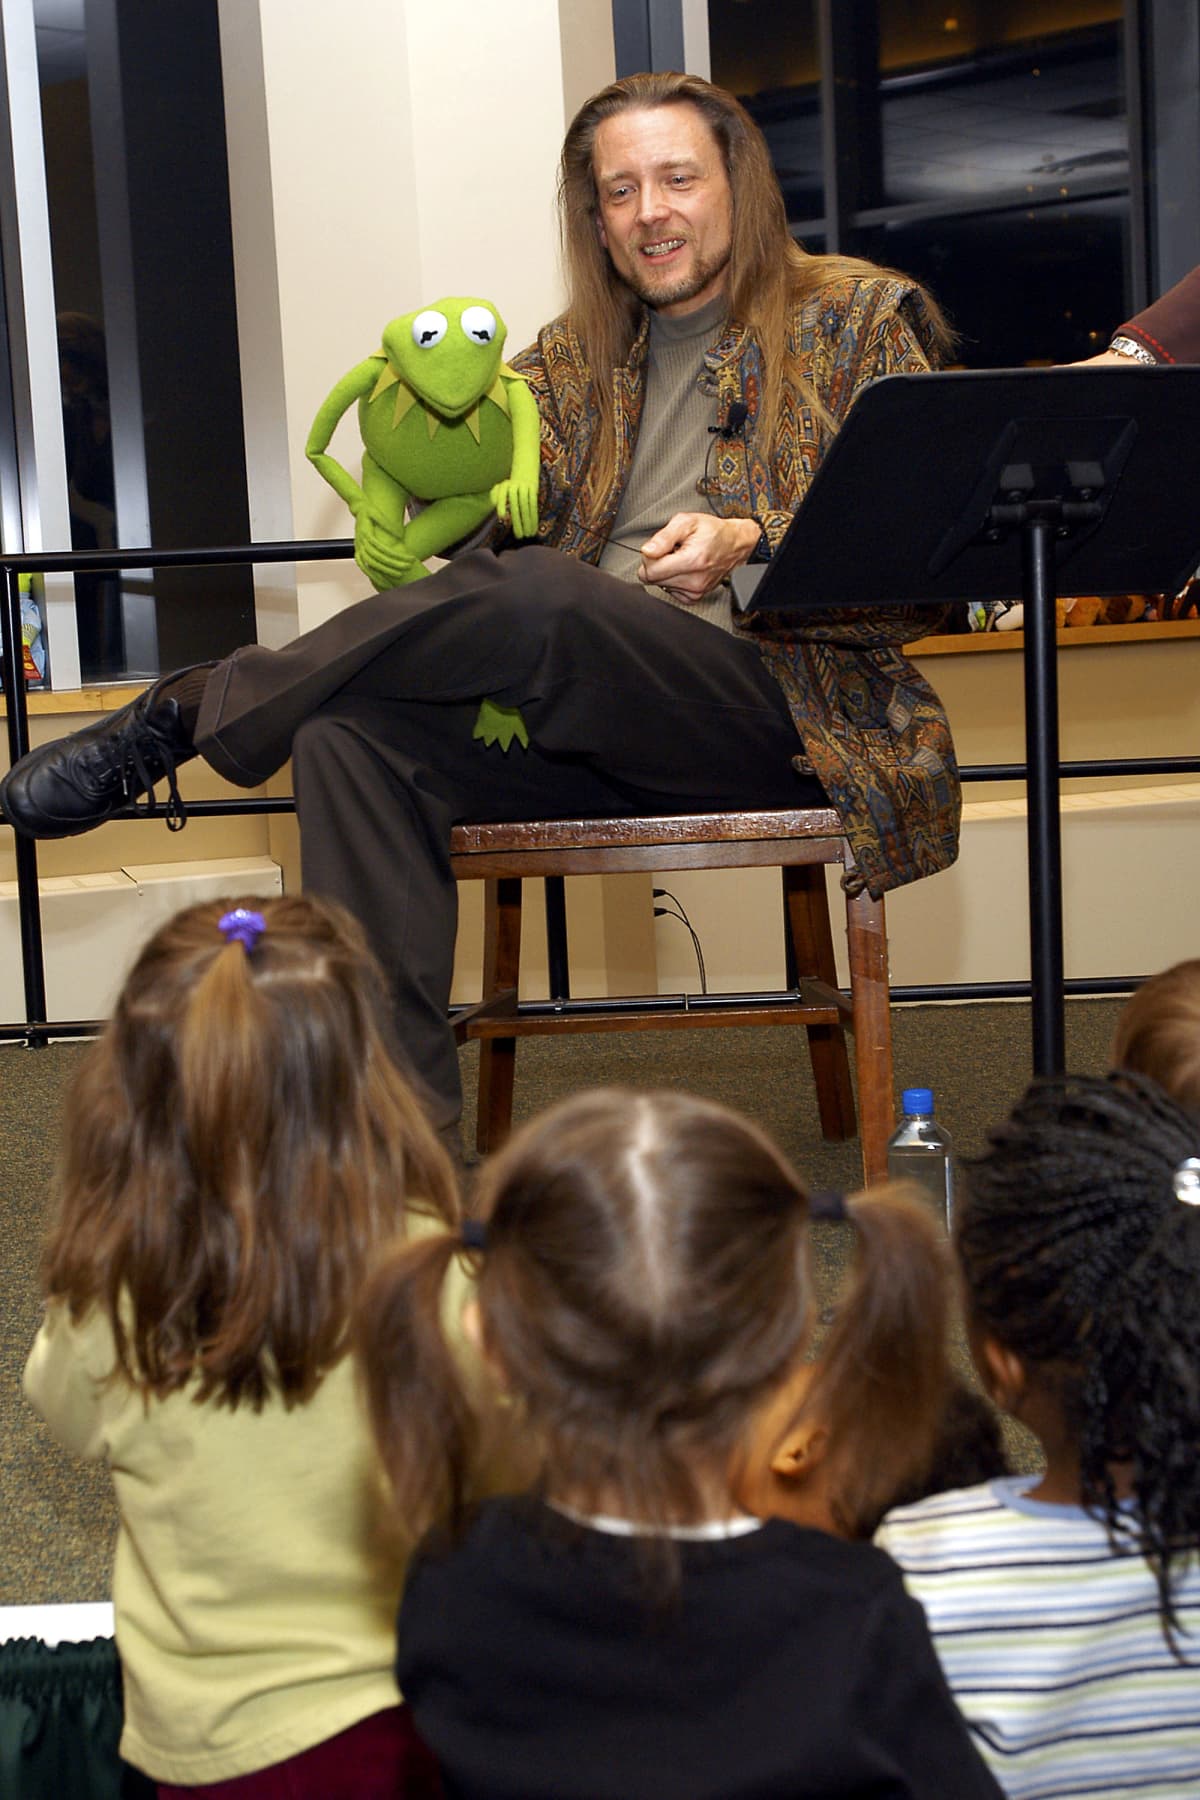 NEW YORK - NOVEMBER 14: Muppet Kermit the Frog and his operator Steve Whitmire take questions from the audience at Barnes & Noble Lincoln Triangle on November 14, 2003,in New York City. (Photo by Lawrence Lucier/Getty Images)